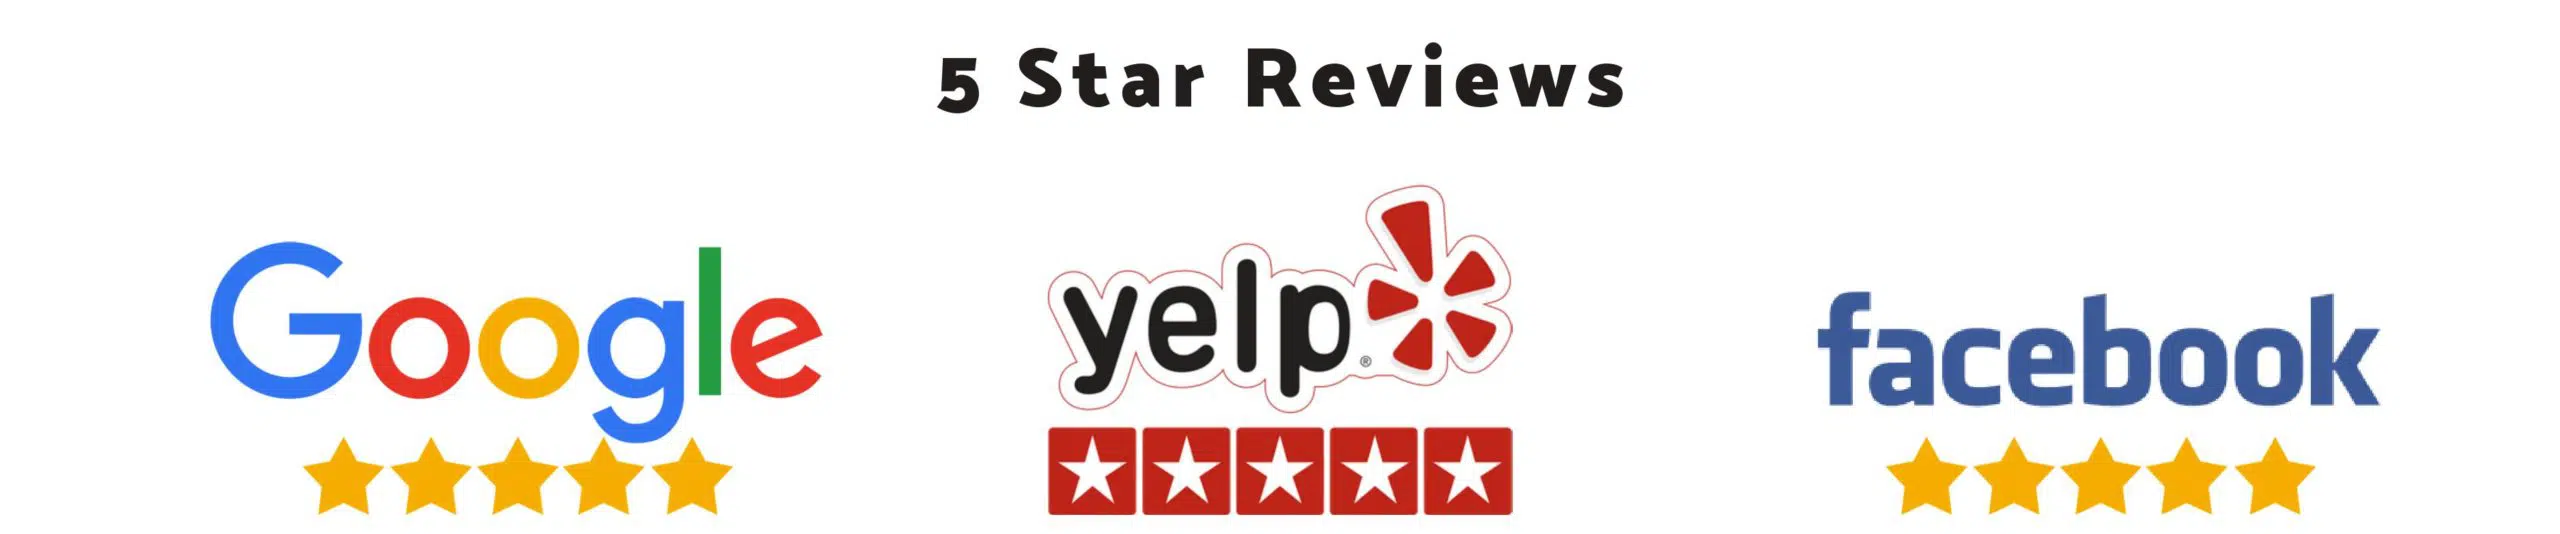 Five star reviews on Google, Yelp, and Facebook.